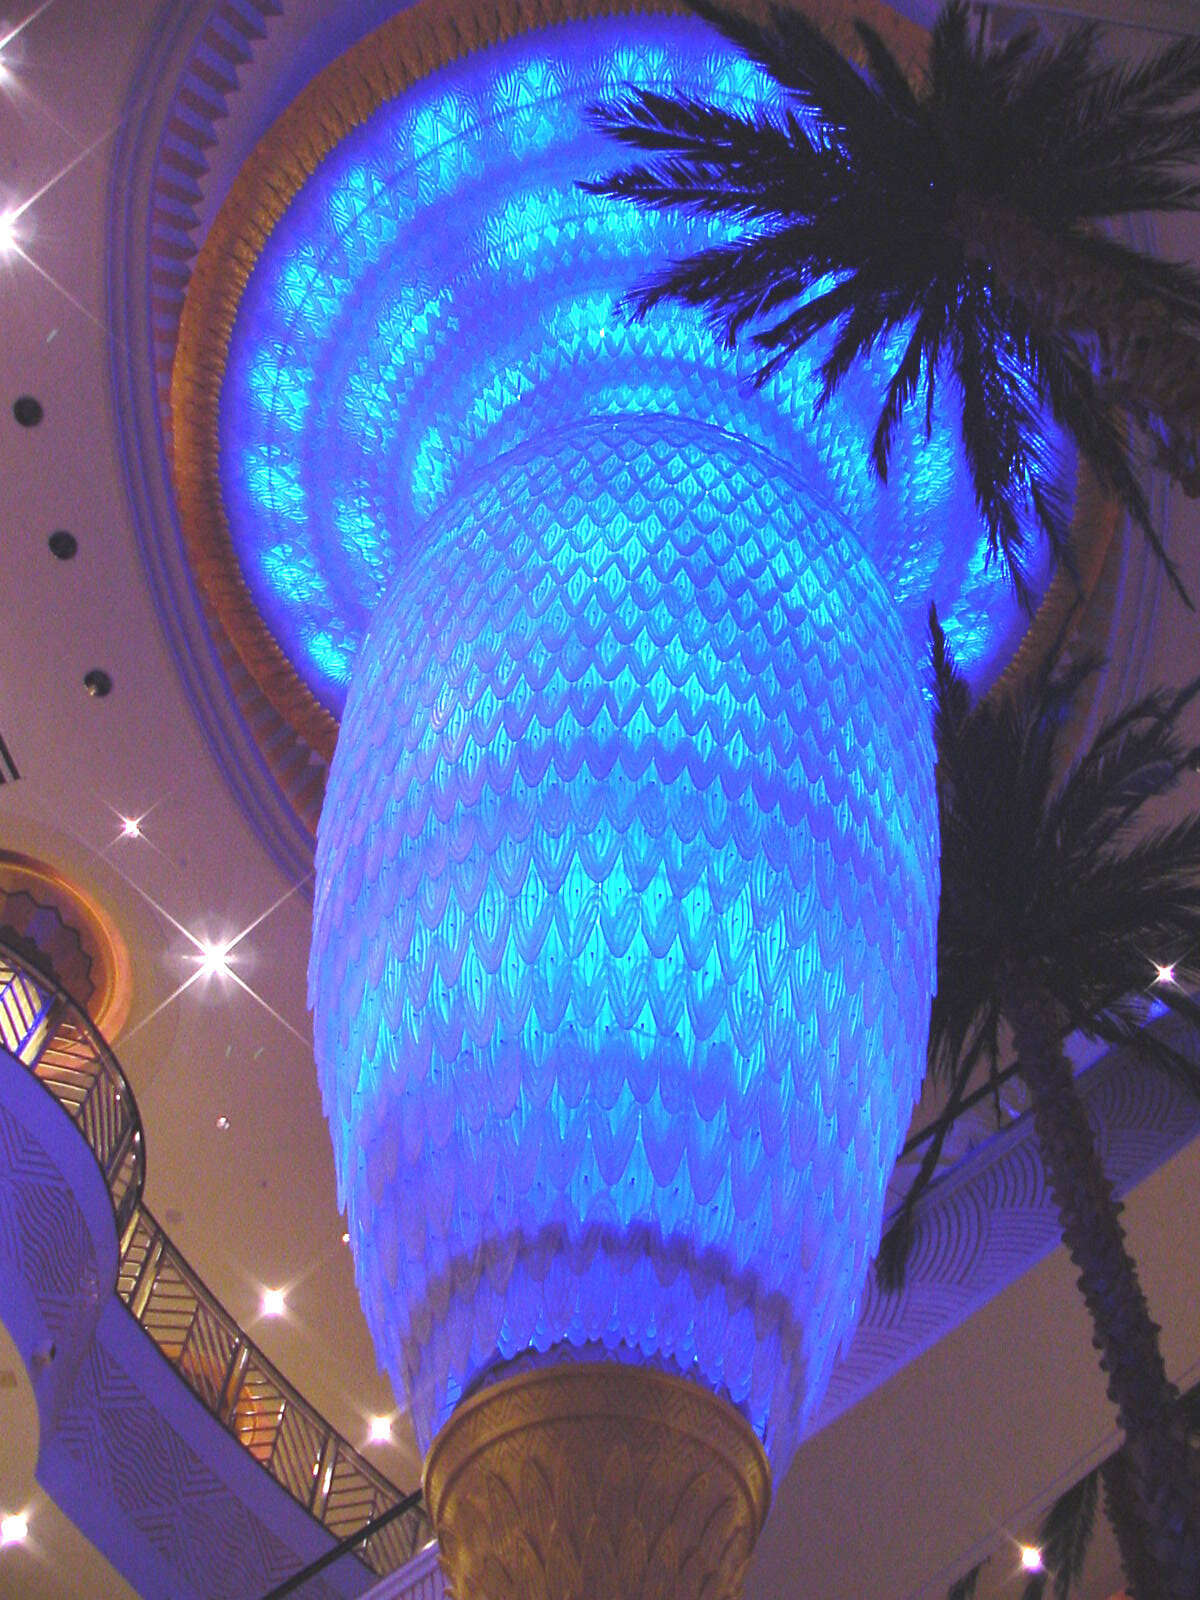 Elevate your visit to Planet Hollywood Casino with the radiant glow of its interior chandeliers. Discover luxury and indulgence at every corner.